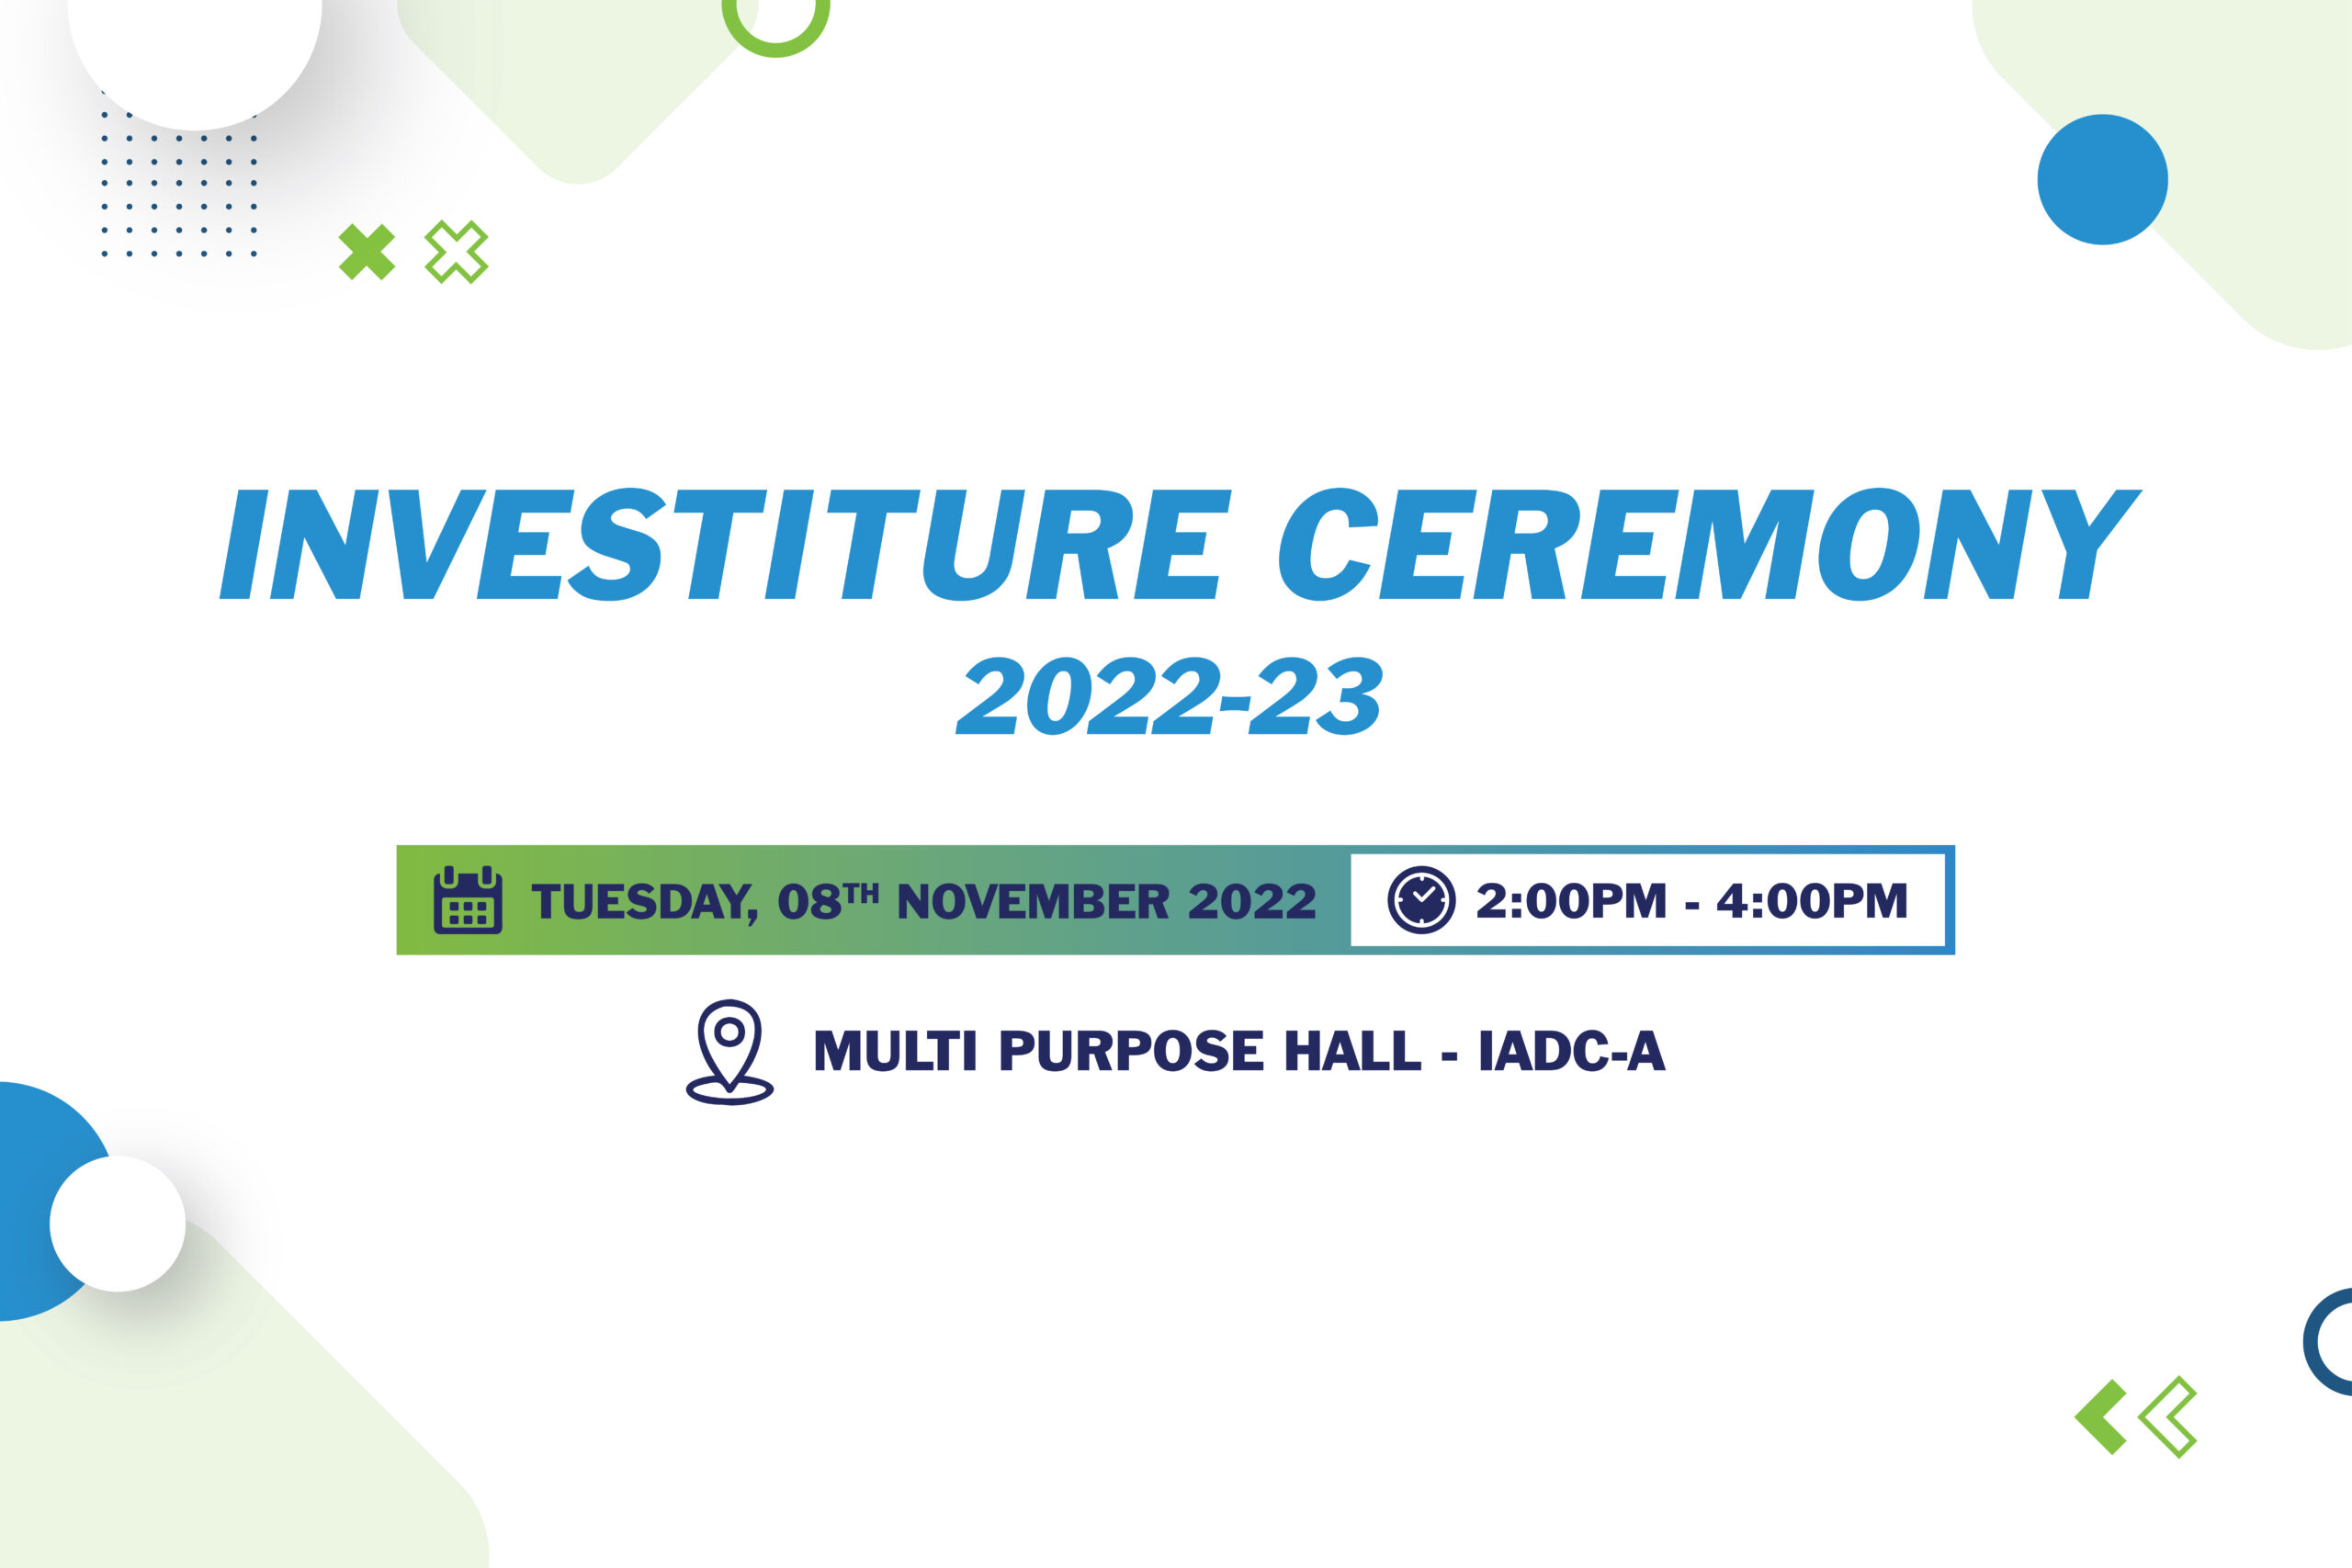 “REPORTS ON INVESTITURE CEREMONY 2022”